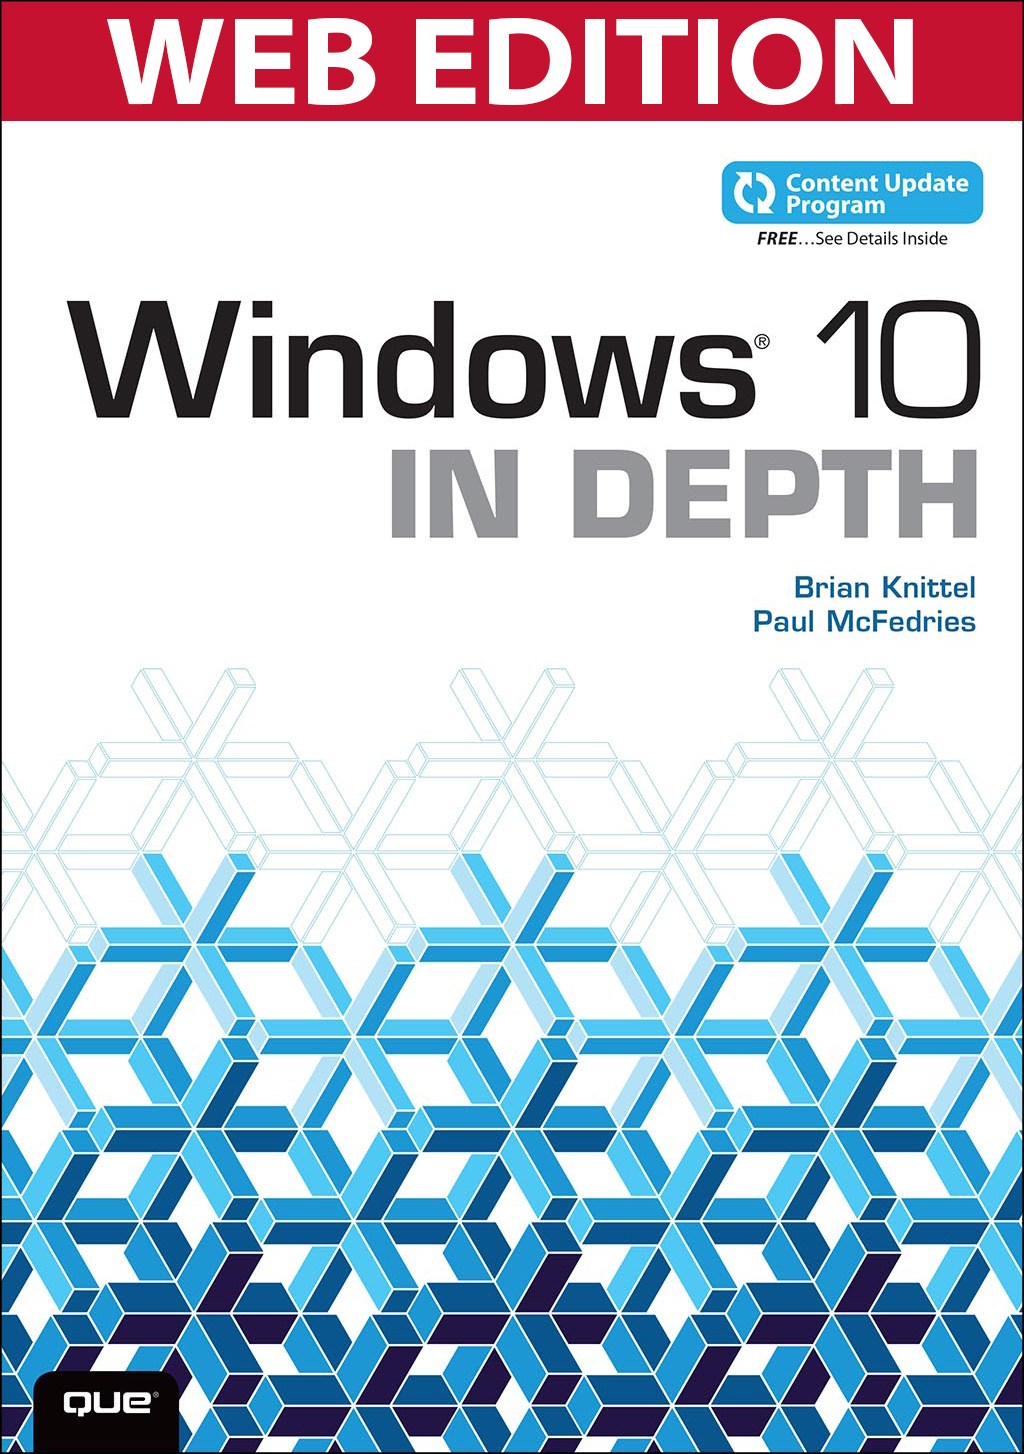 Windows 10 In Depth (Web Edition and Content Update Program)